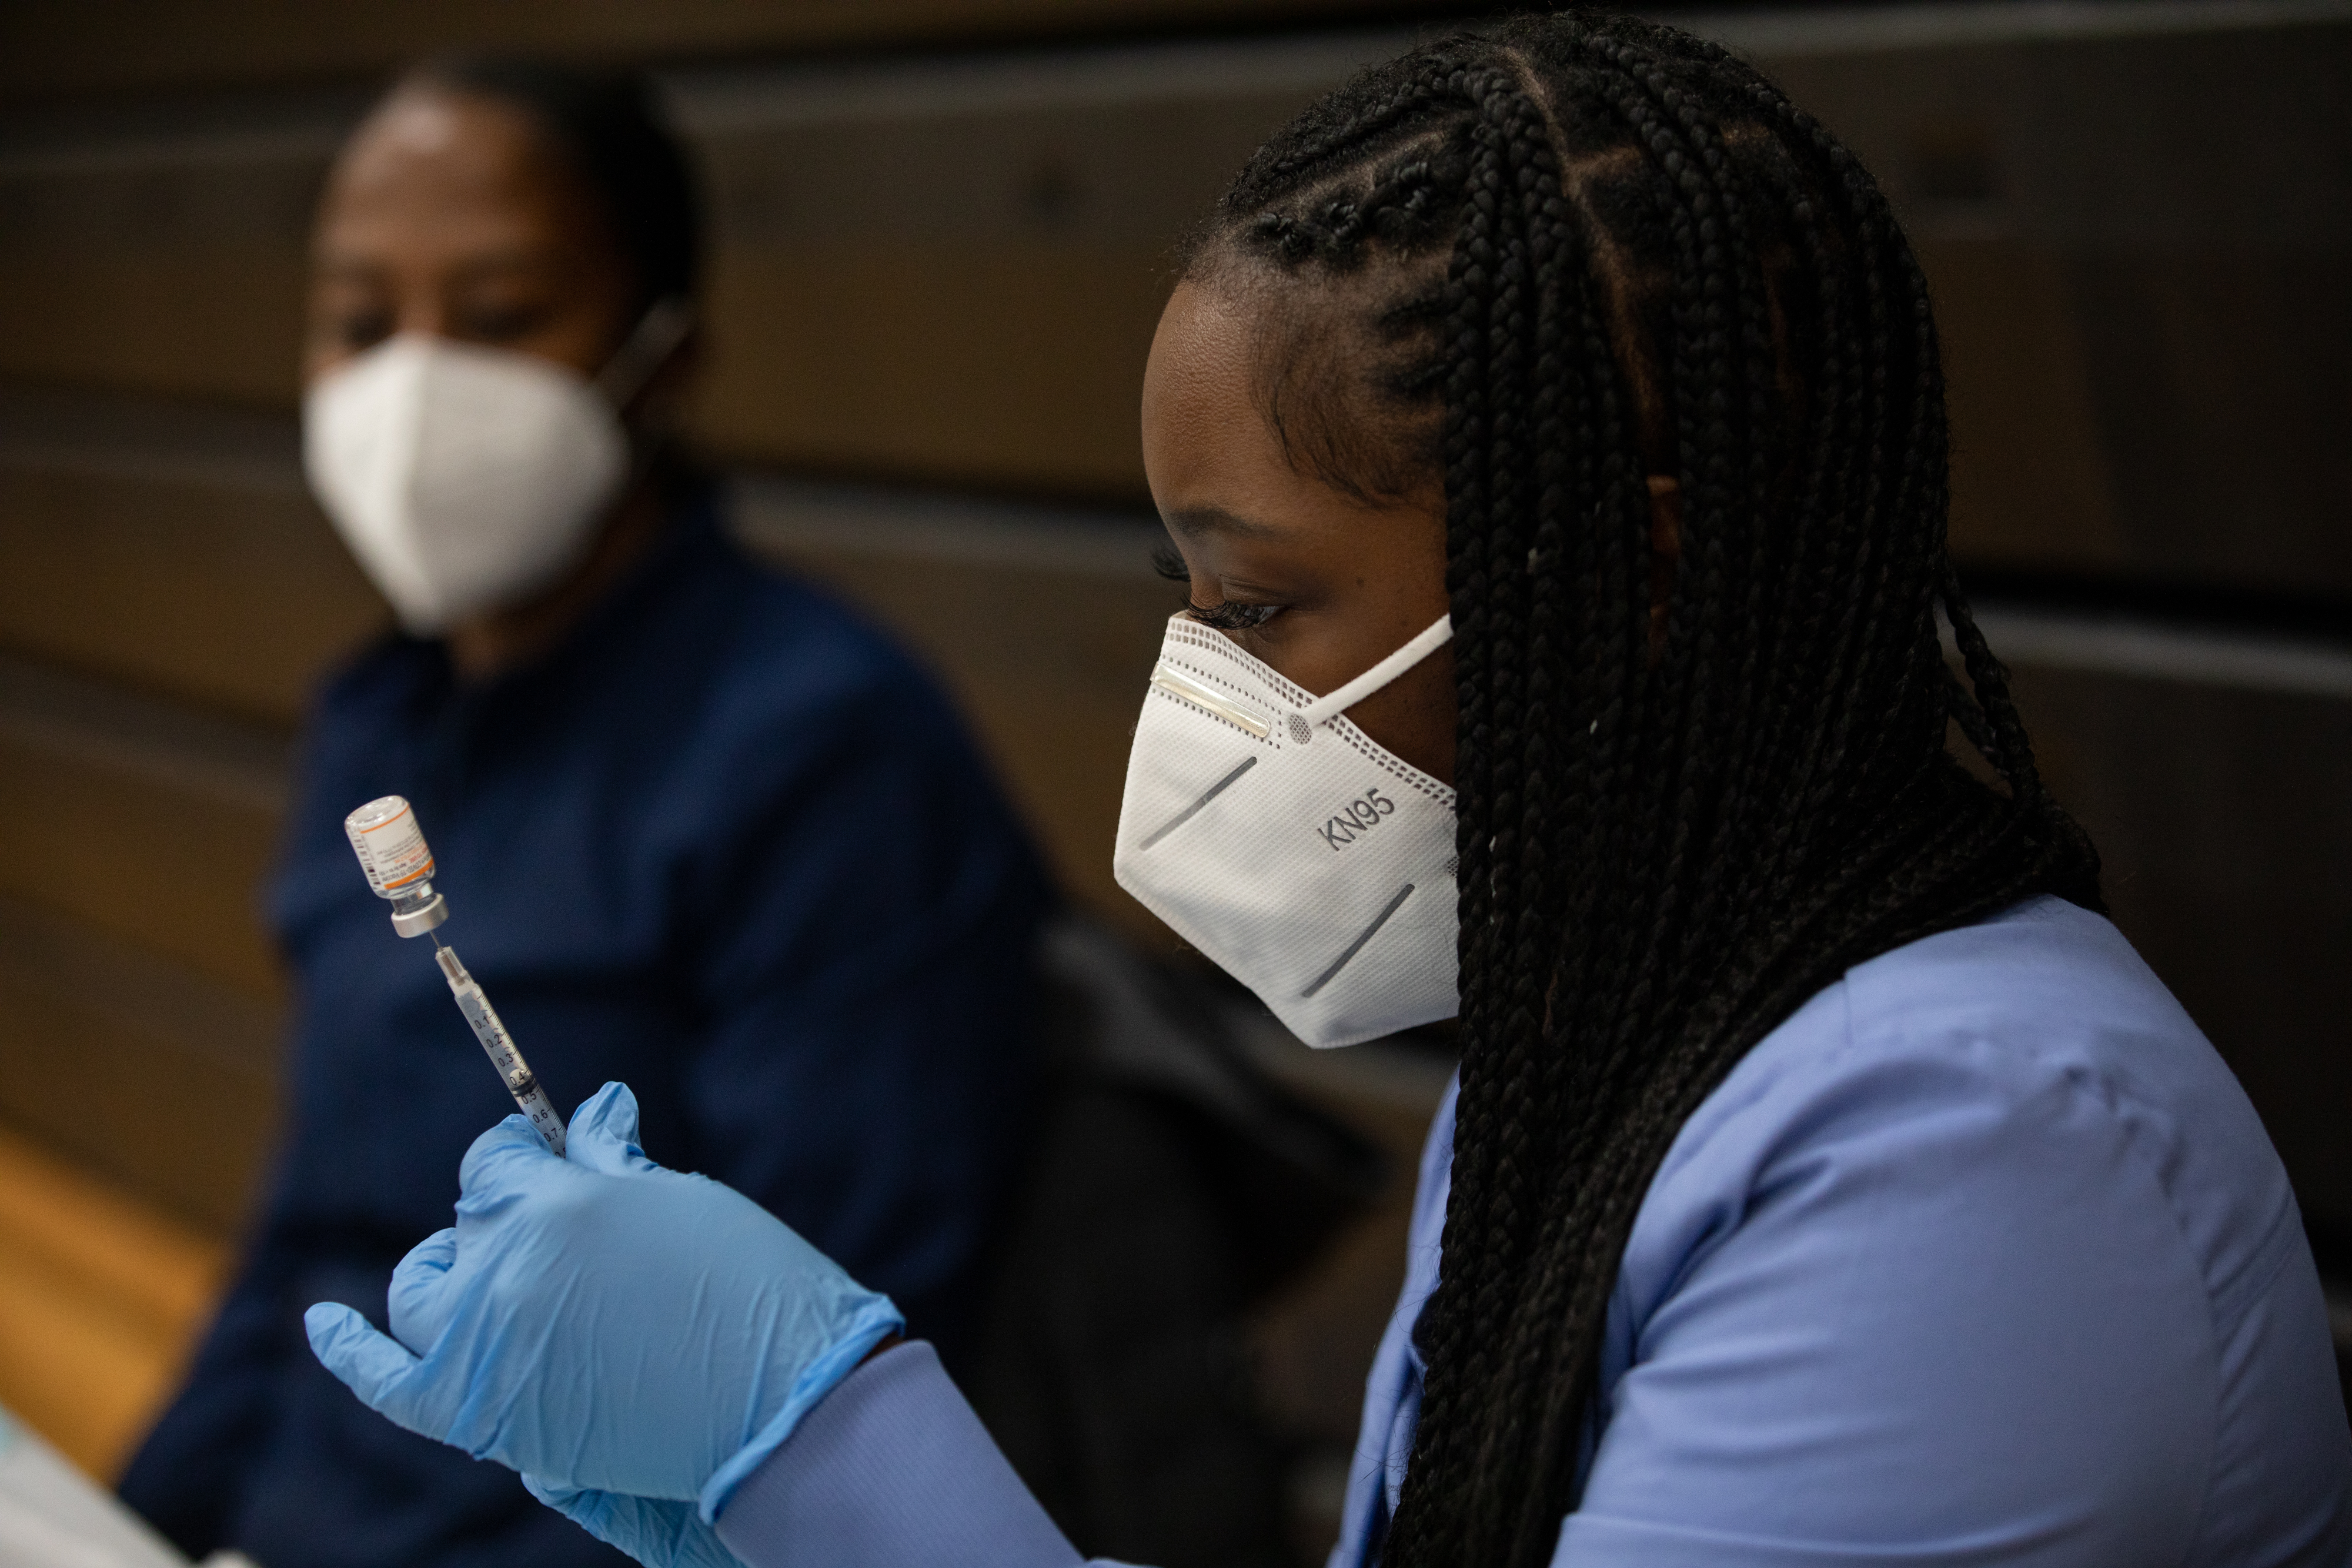 A woman wearing scrubs, medical gloves, and a KN95 mask draws vaccine from a vial using a syringe needle. Another person in the background watches.